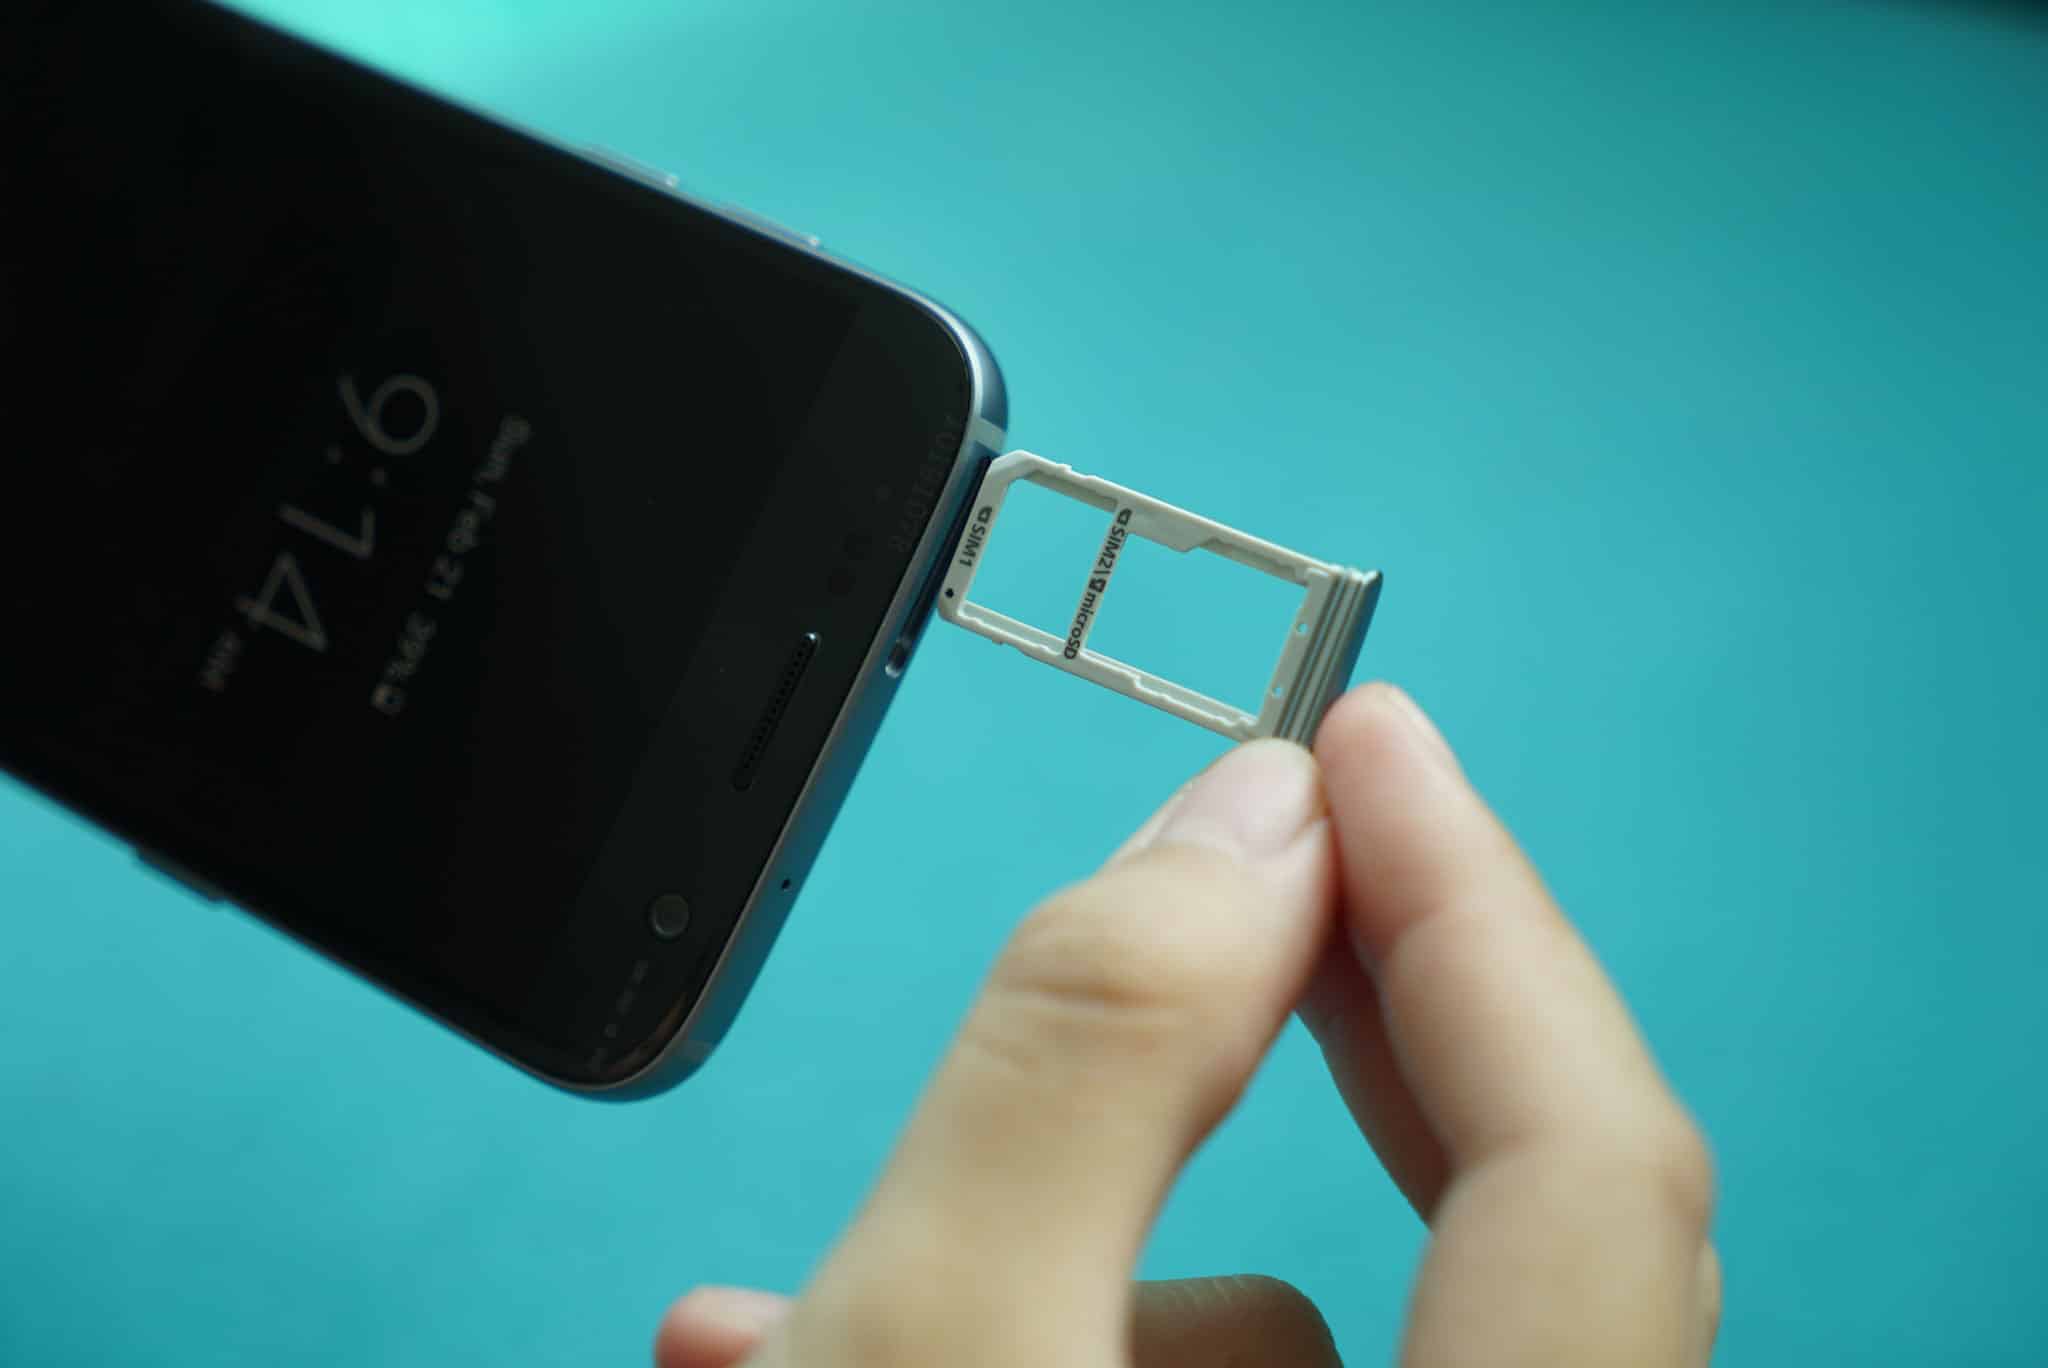 The hybrid SIM tray on the S7 and S7 Edge takes two nano SIM cards or one SIM and on microSD card.